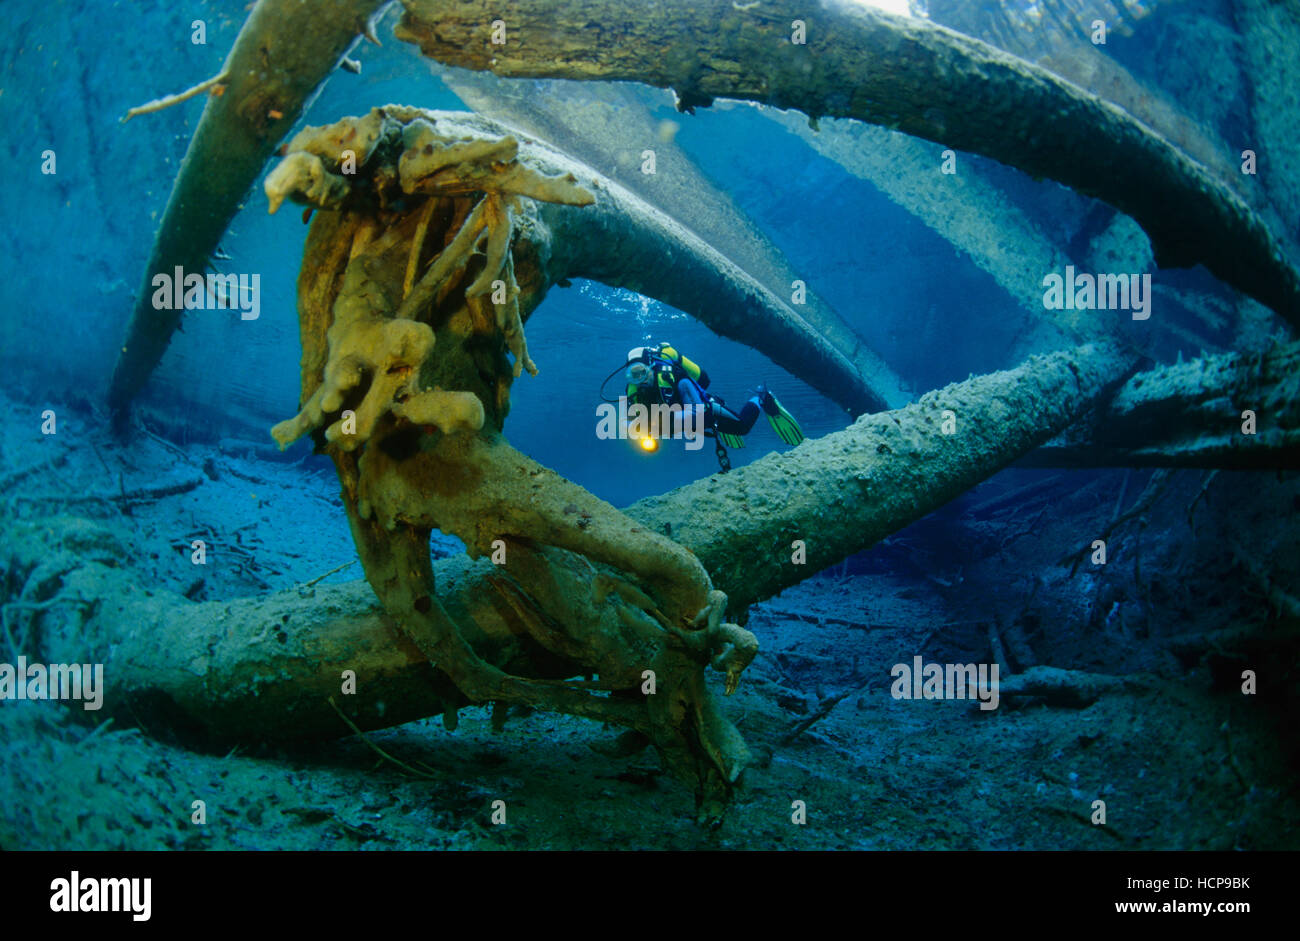 Diver in a spring with sunken tree trunks Stock Photo